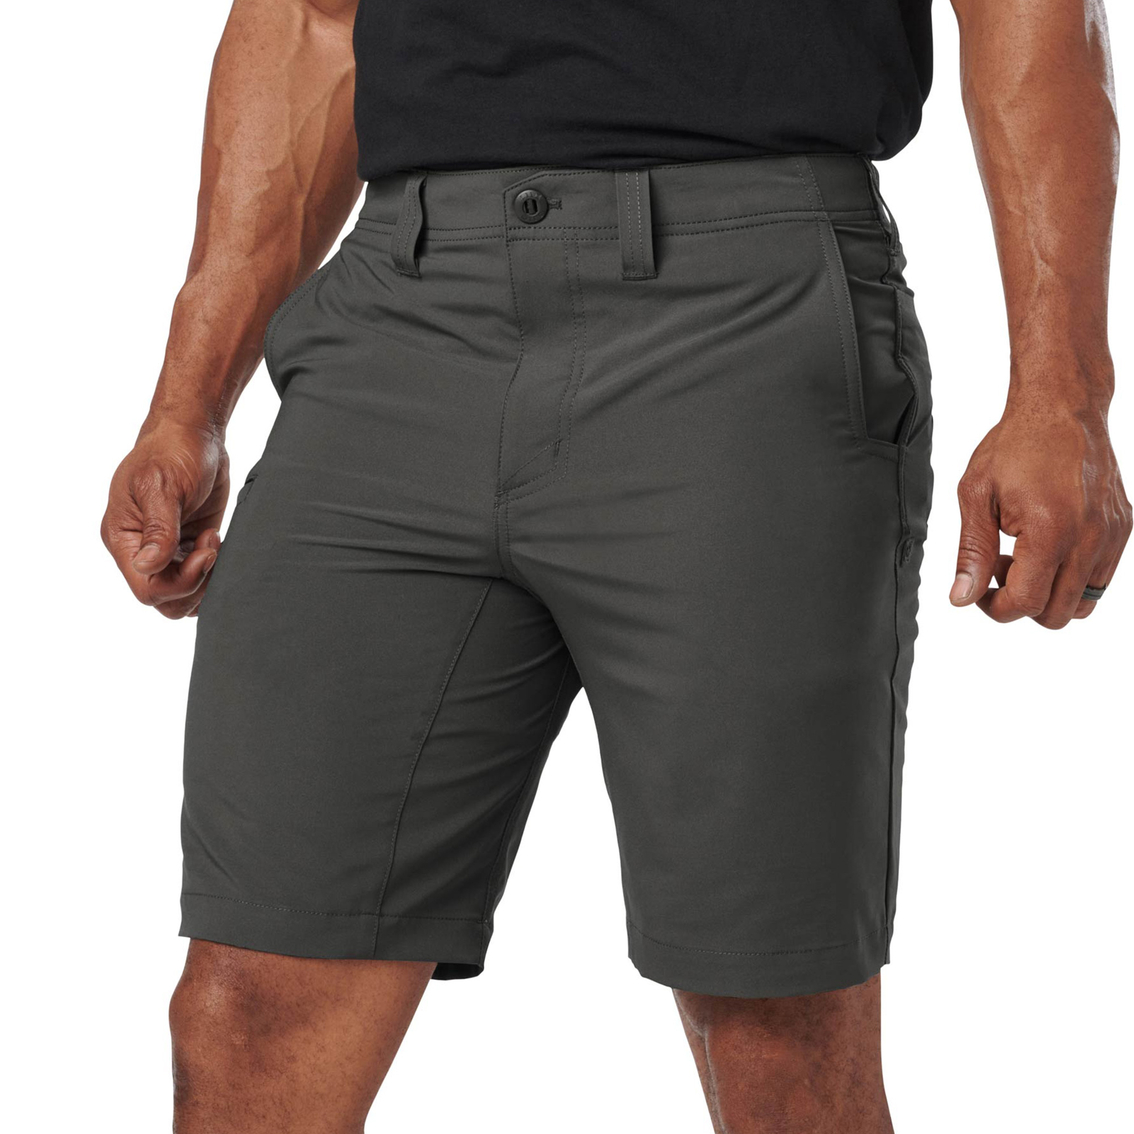 5.11 Dart Shorts | Shorts | Clothing & Accessories | Shop The Exchange